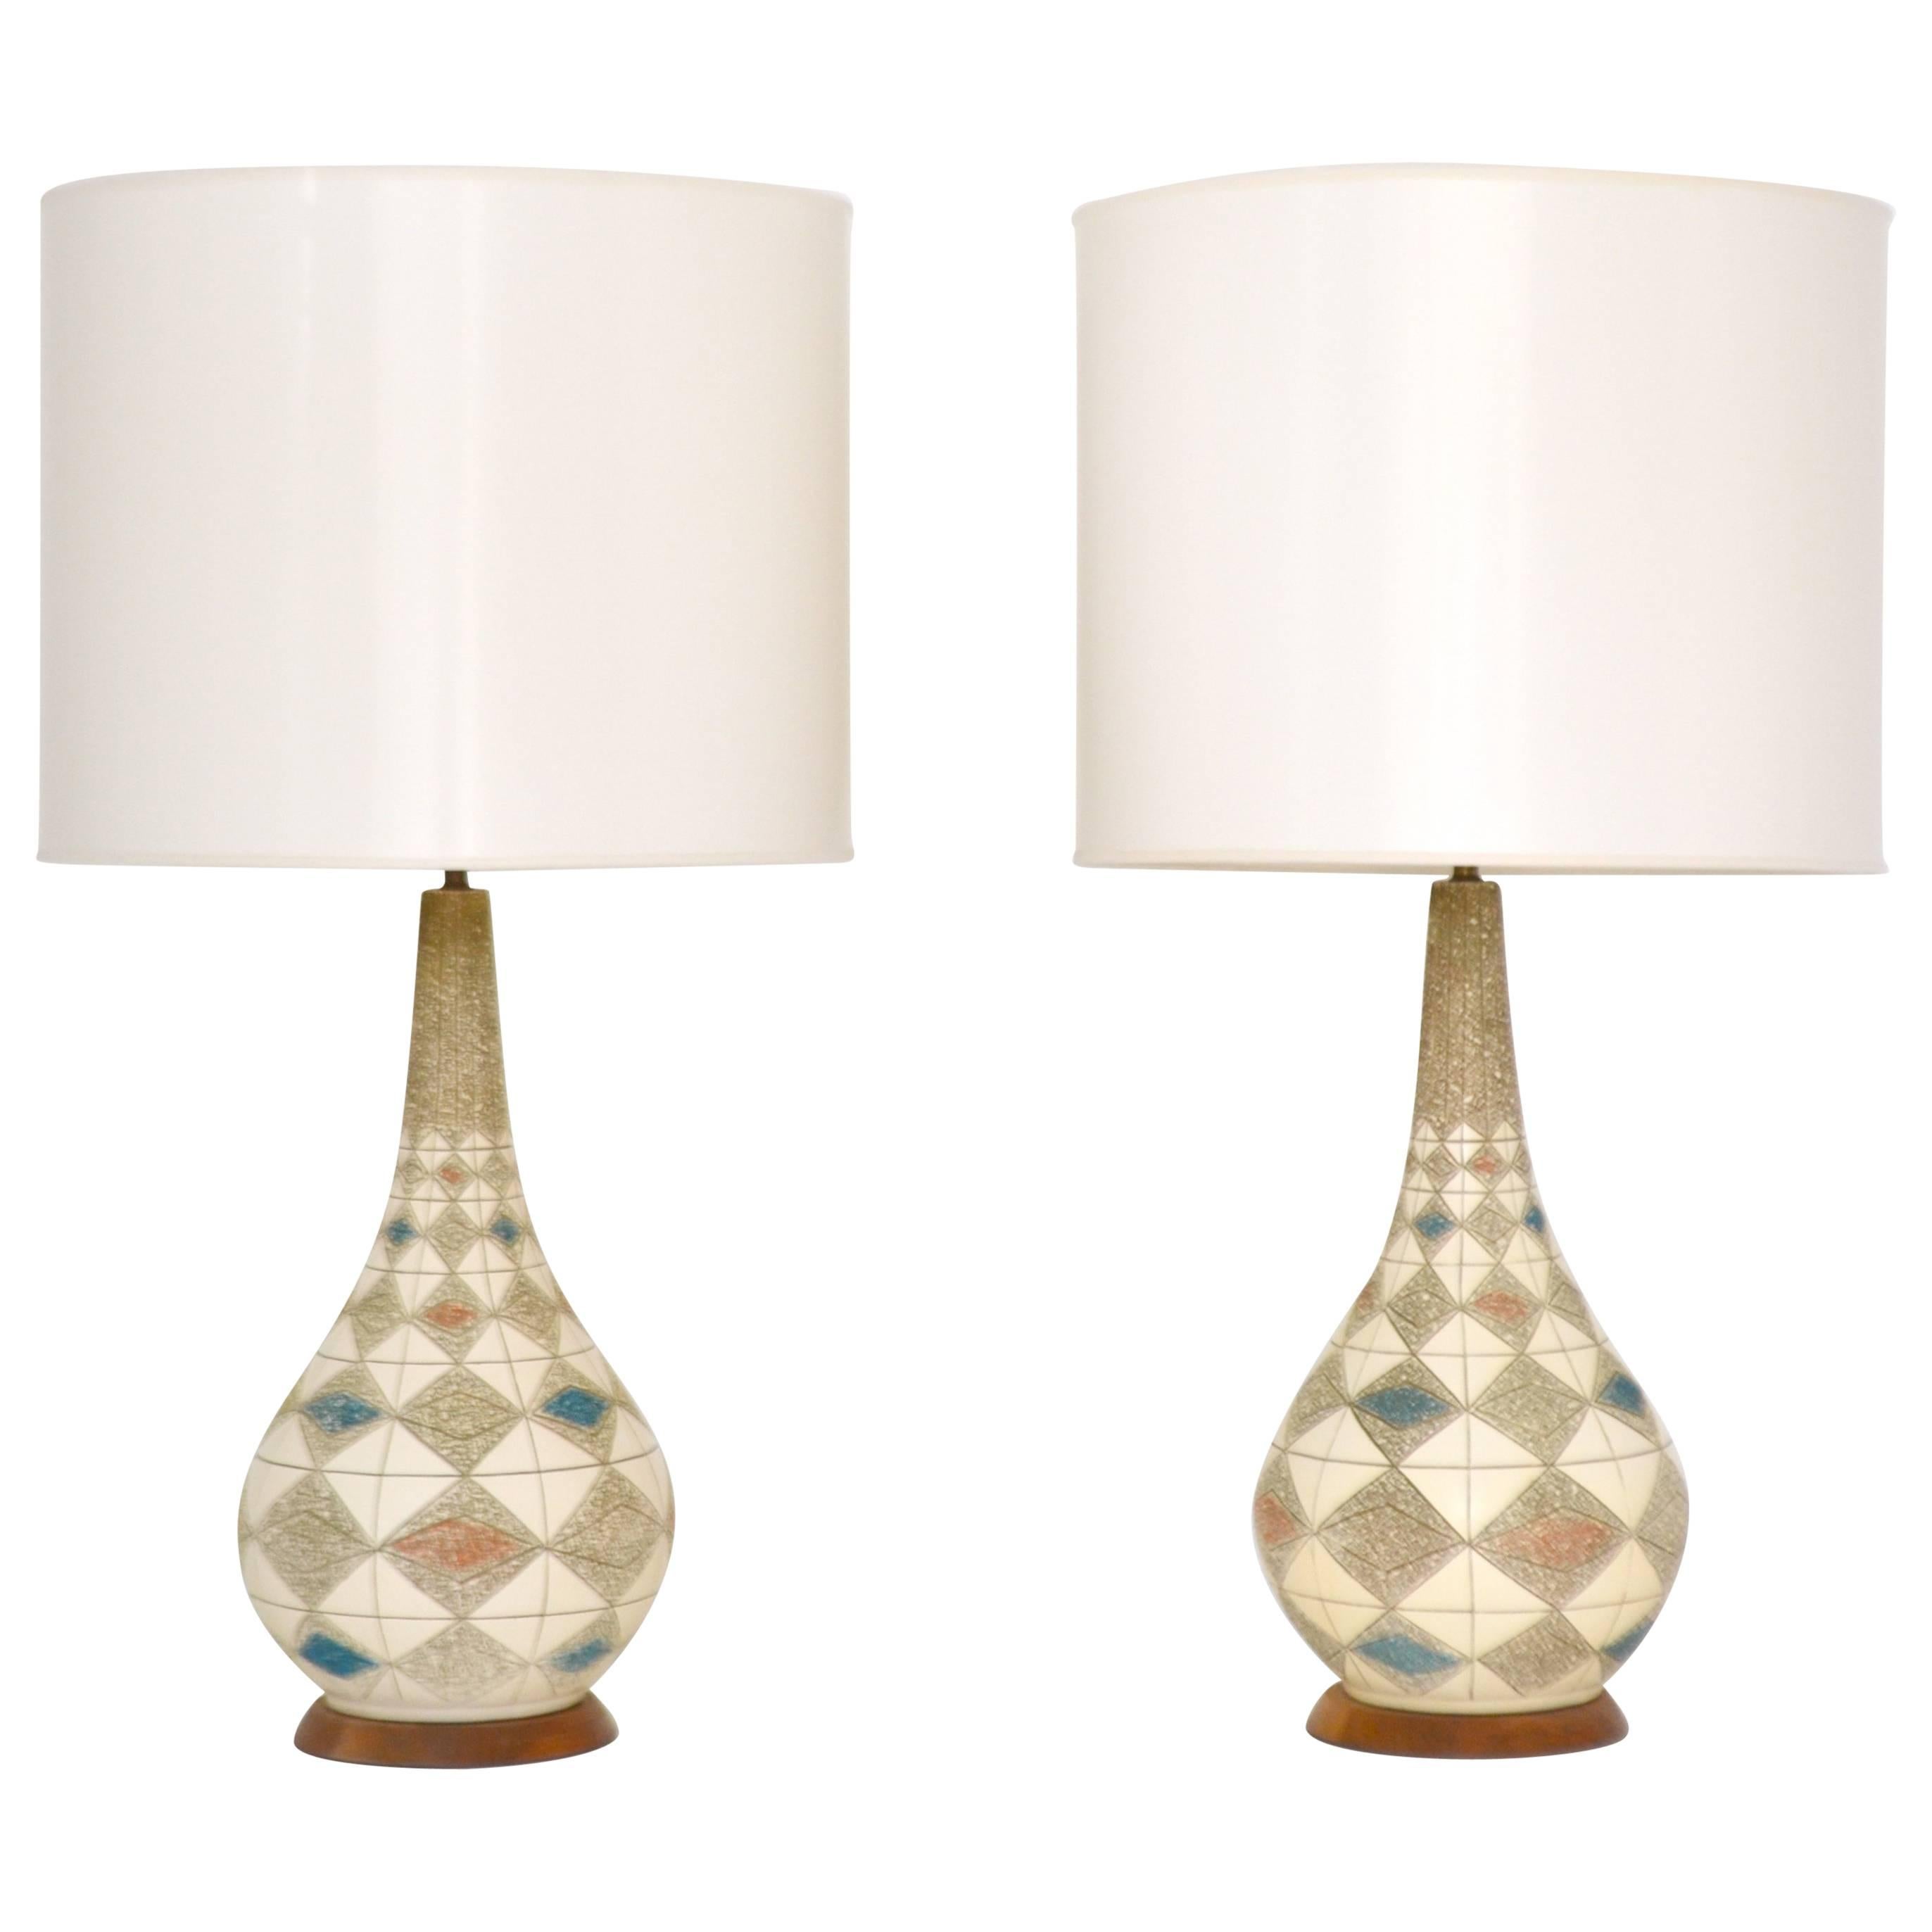 Pair of Midcentury Ceramic Table Lamps For Sale